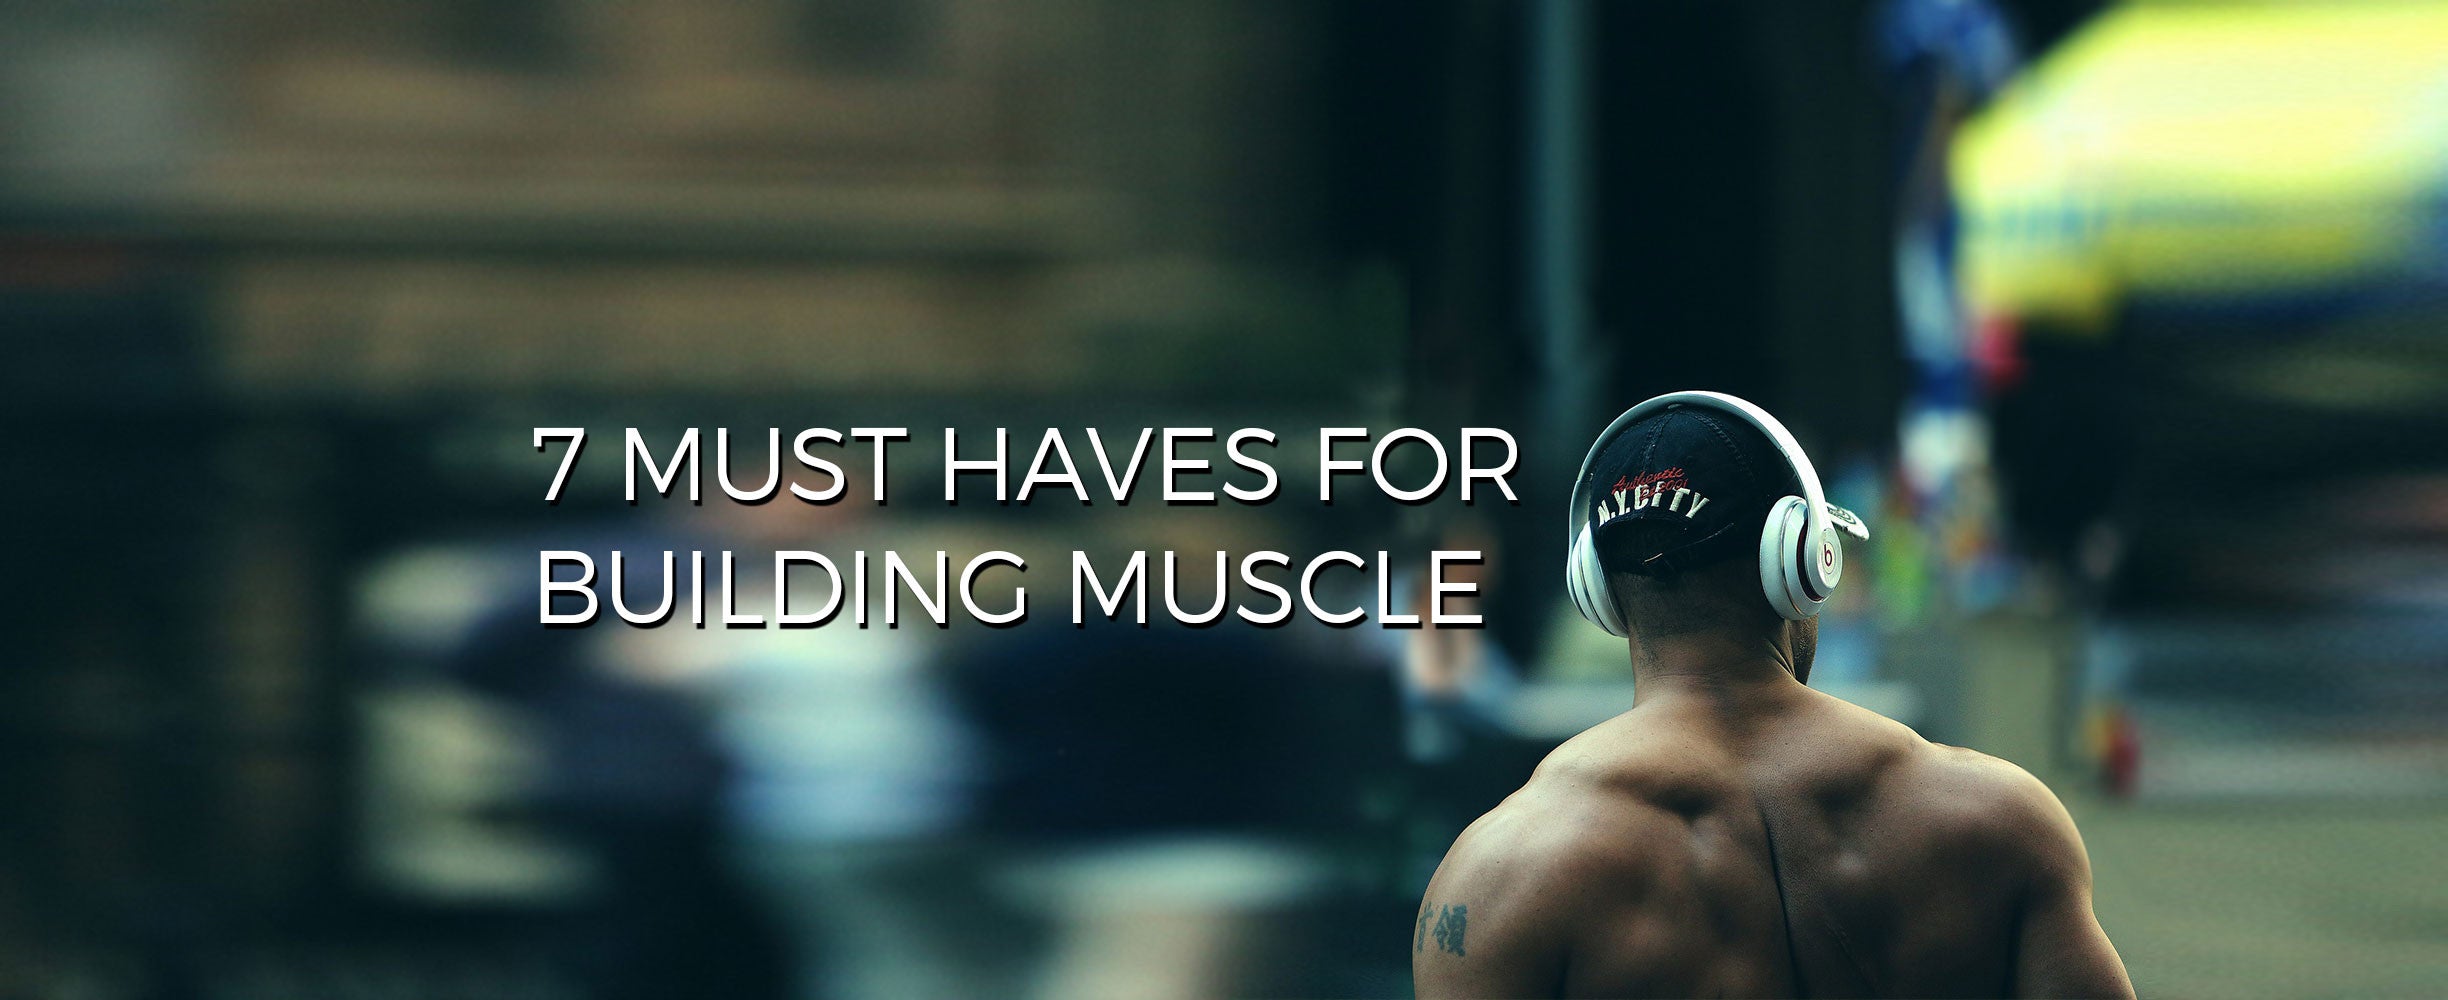 How To Build Muscle: The Ultimate Guide to Building Lean Muscle